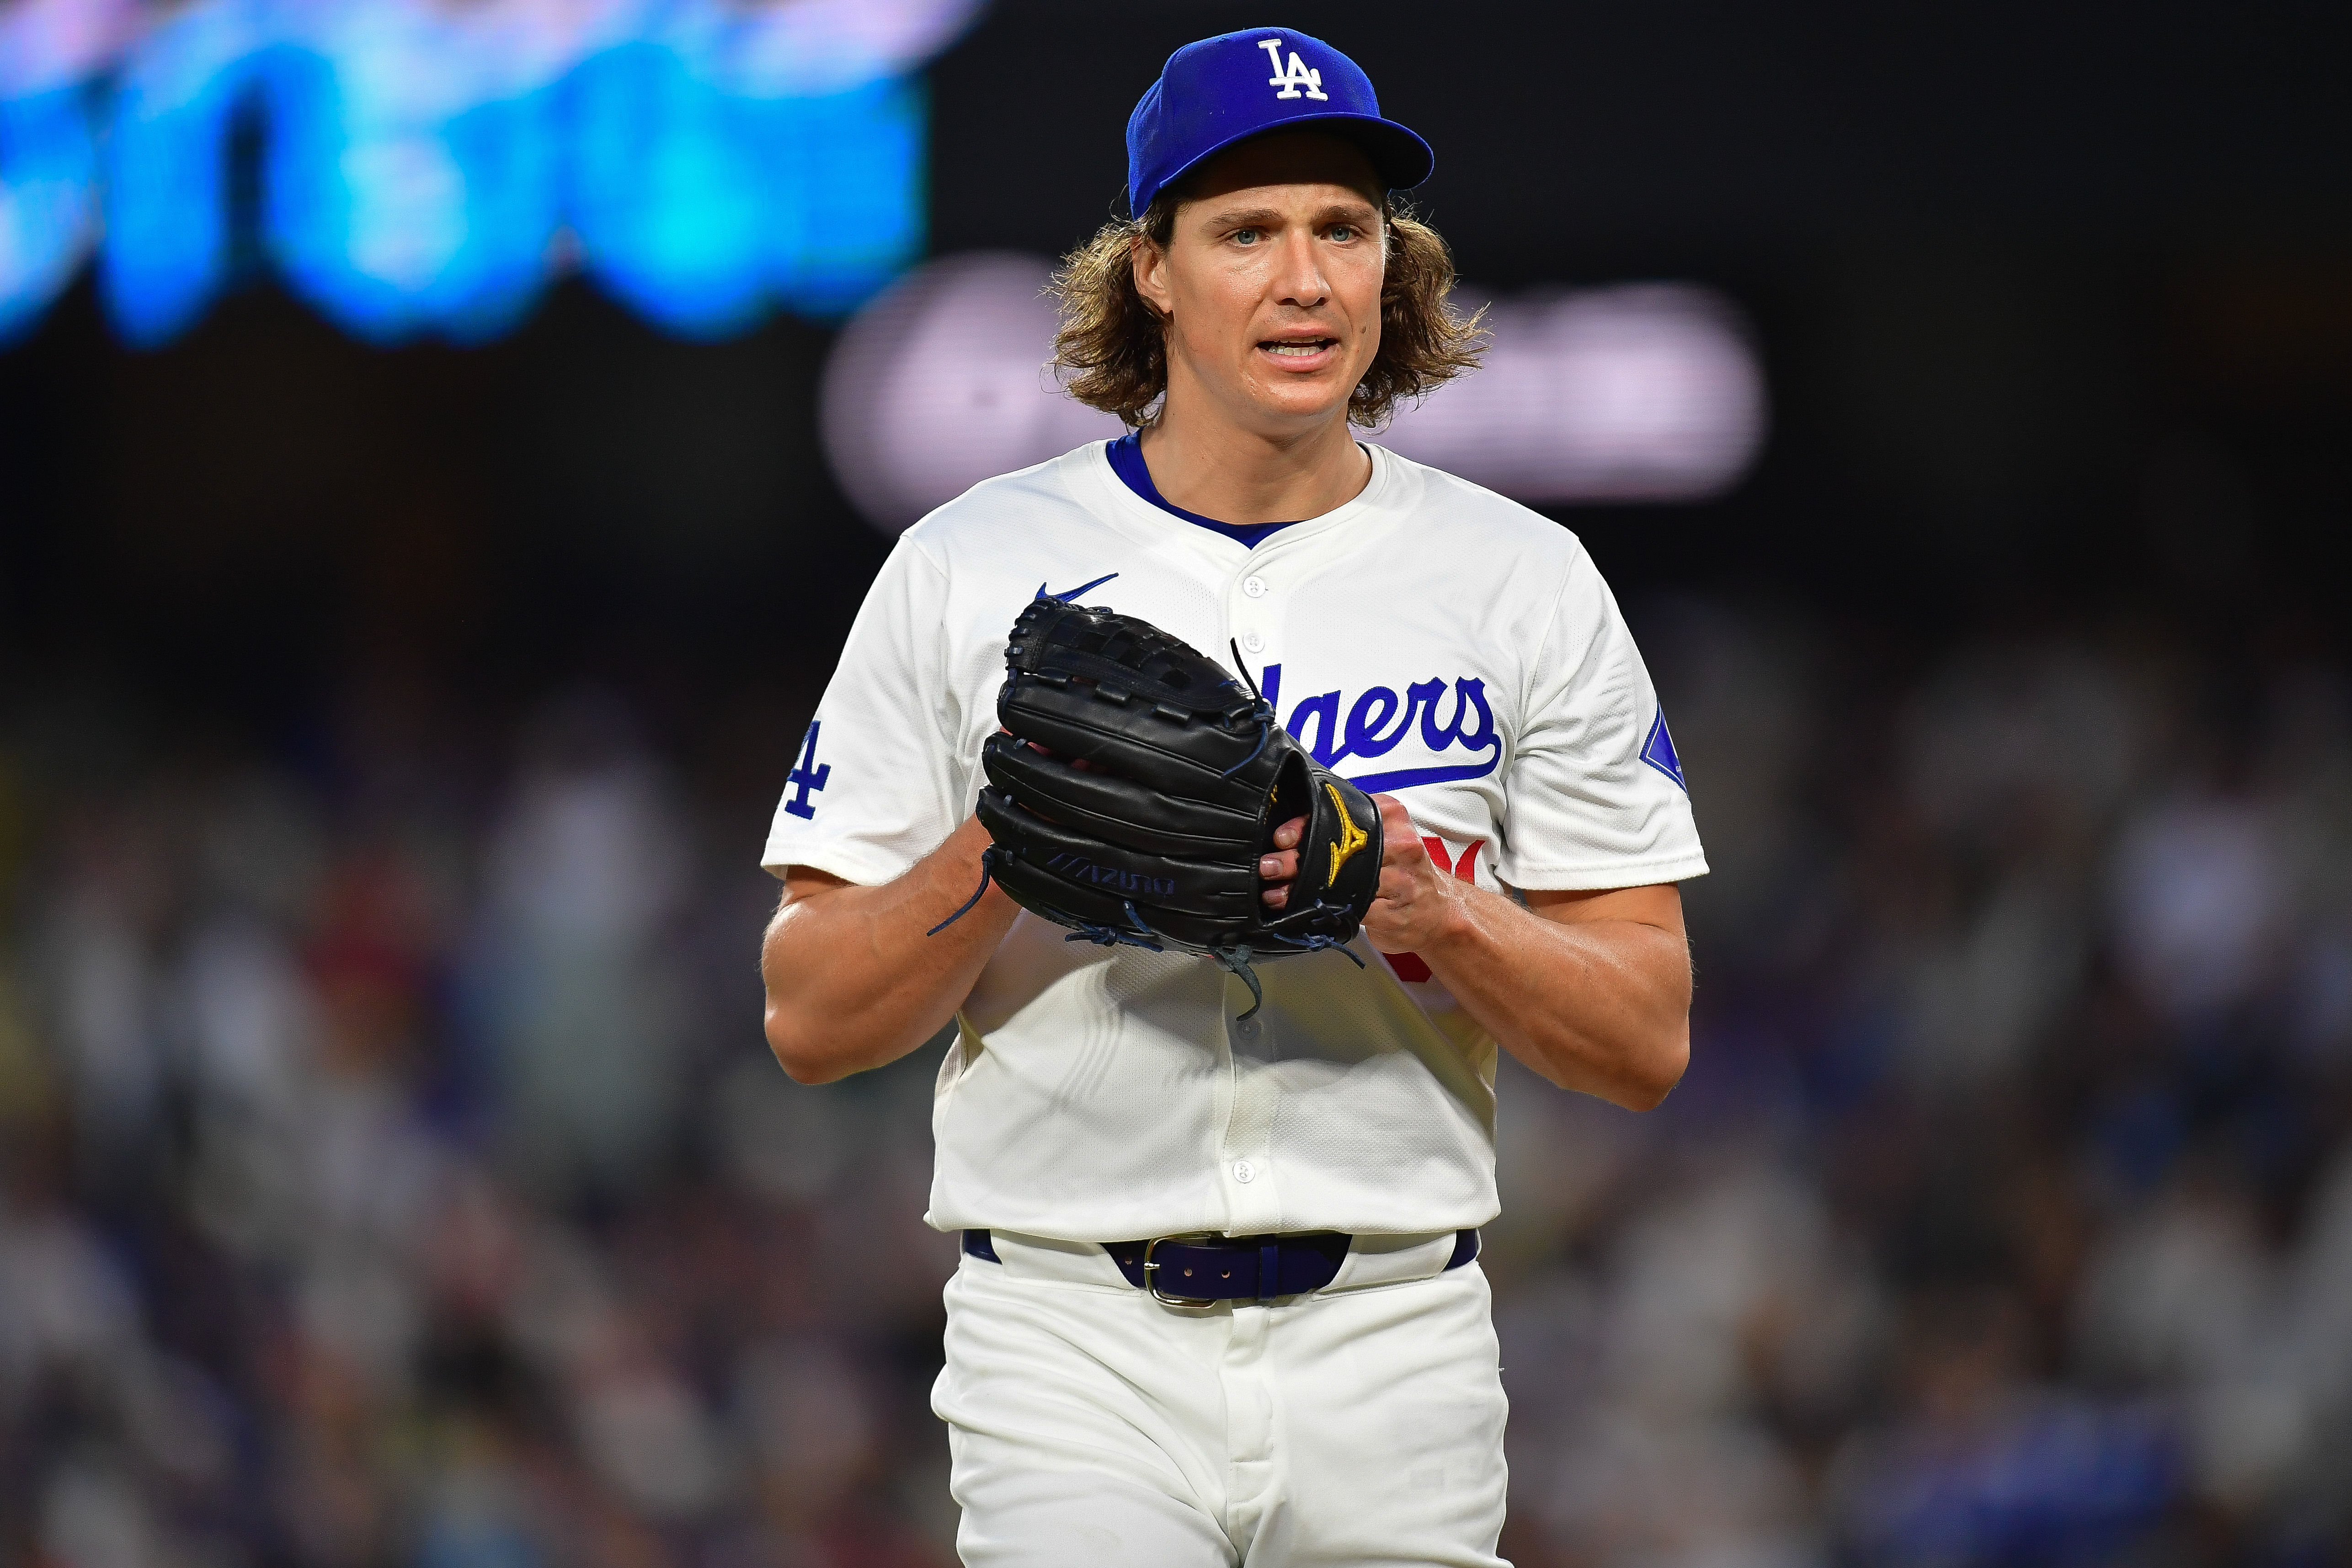 Tyler Glasnow has been great for LA